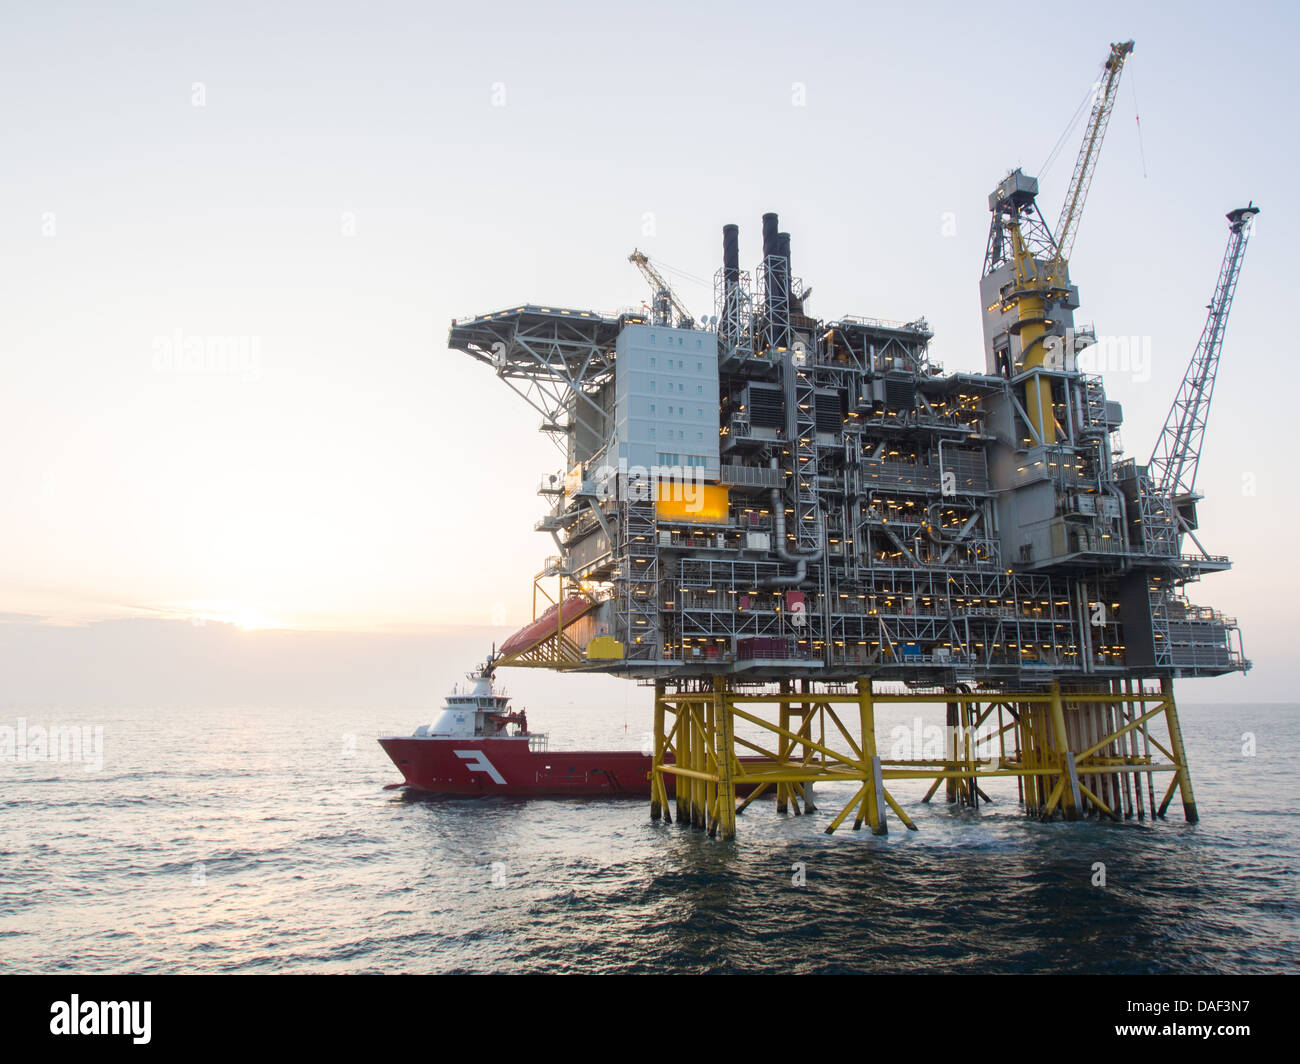 Offshore oil platform with a supply vessel on the North Sea, in the Norwegian sector Stock Photo